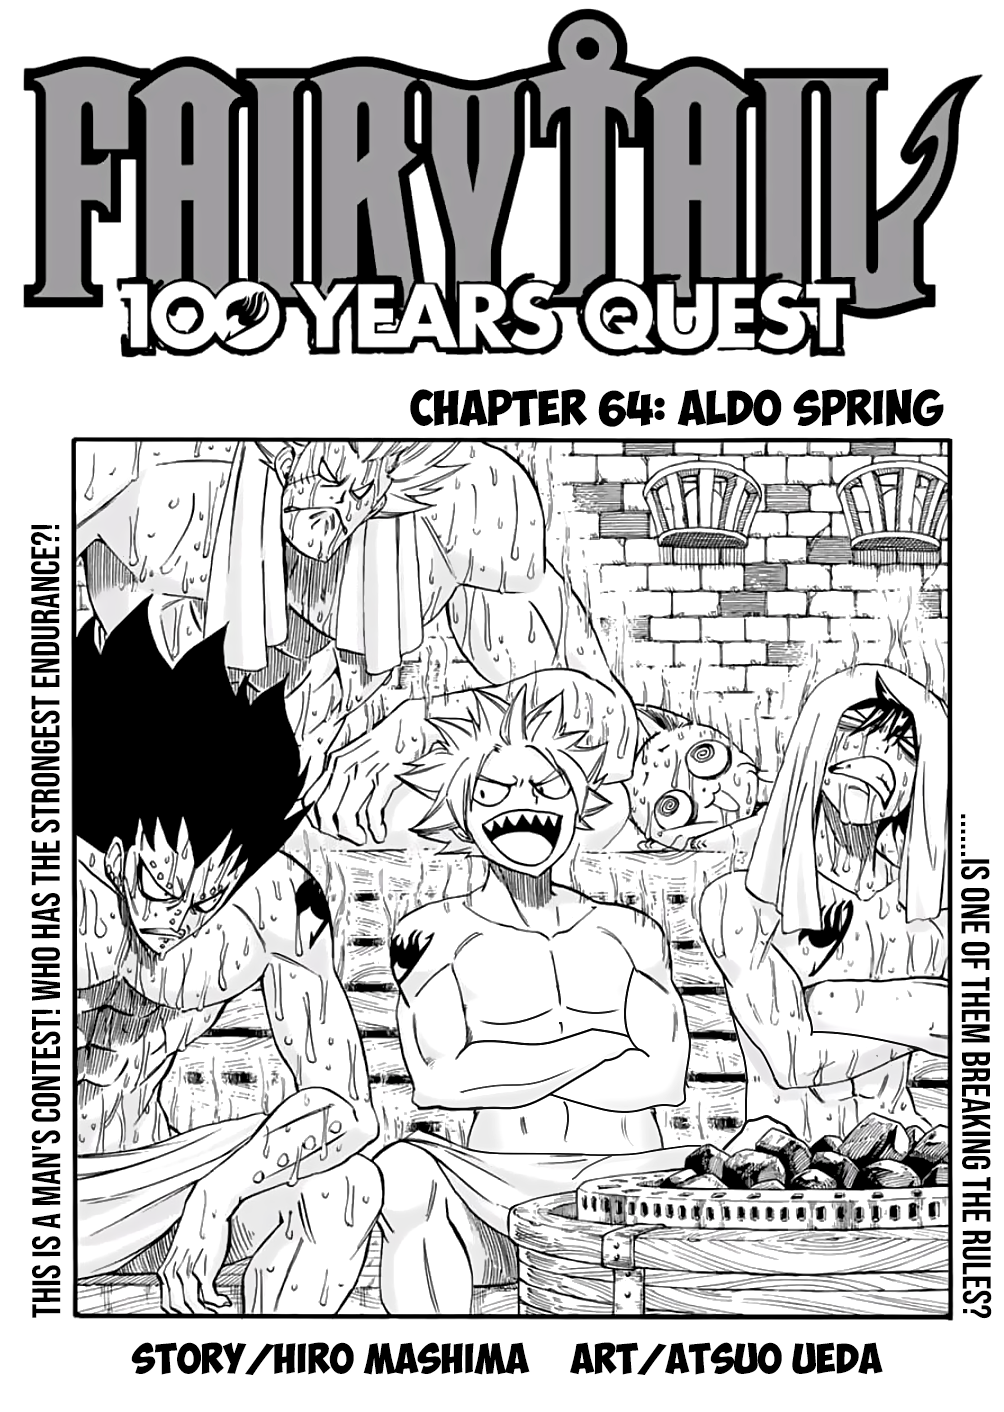 Fairy tail 100 years quest hentai